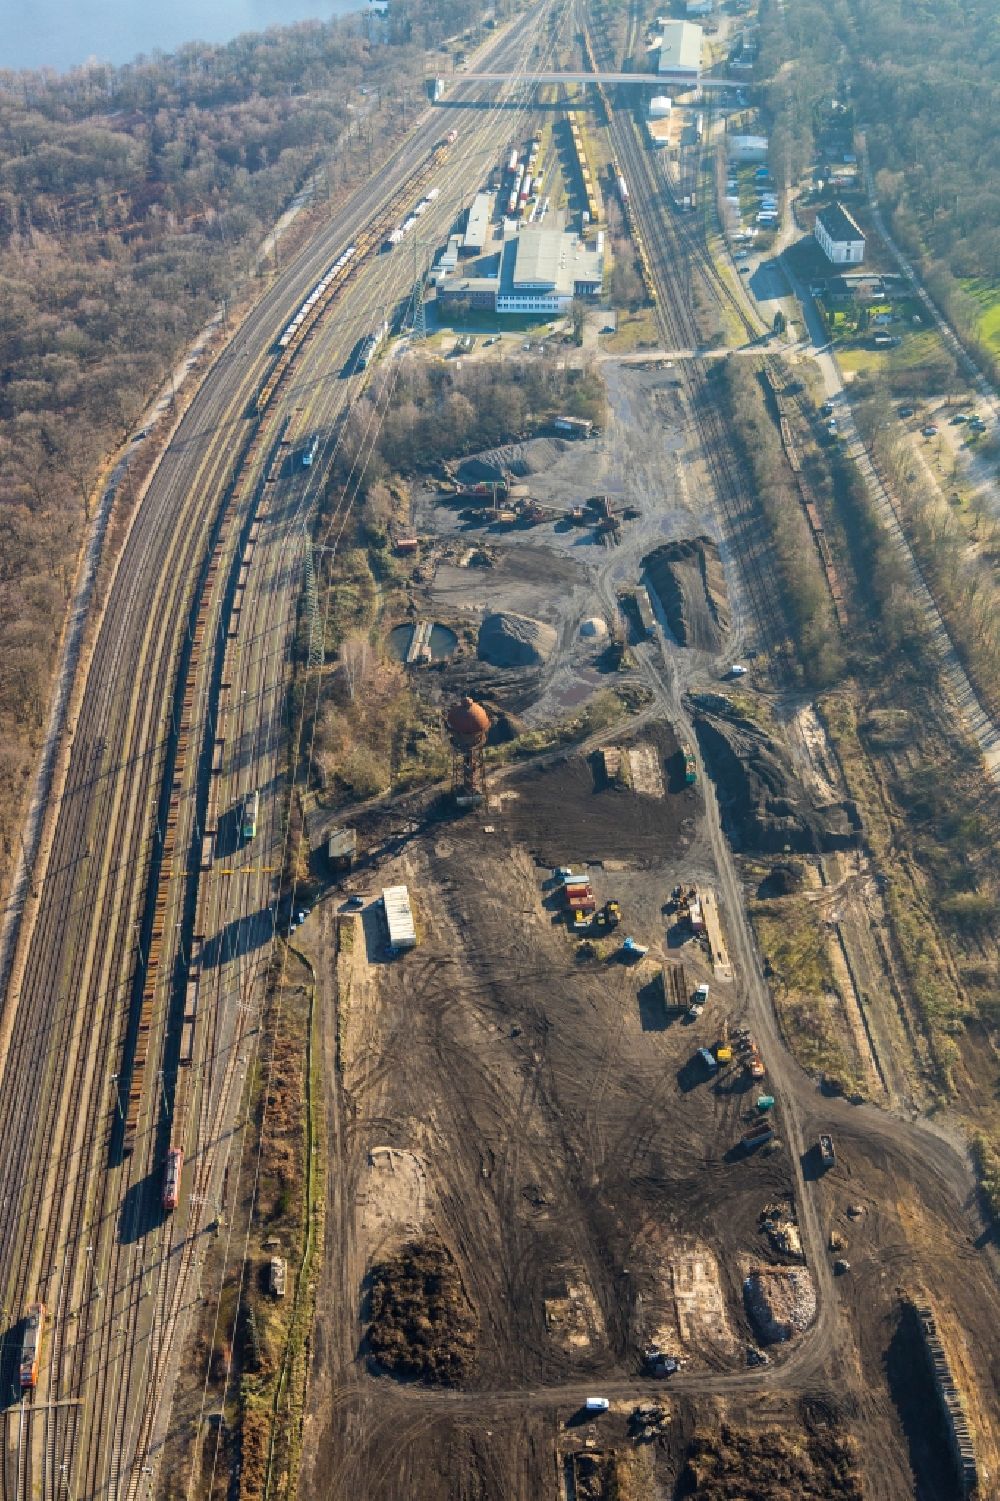 Aerial image Duisburg - Development area of the decommissioned and unused land and real estate on the former marshalling yard and railway station of Deutsche Bahn in Duisburg in the state North Rhine-Westphalia, Germany